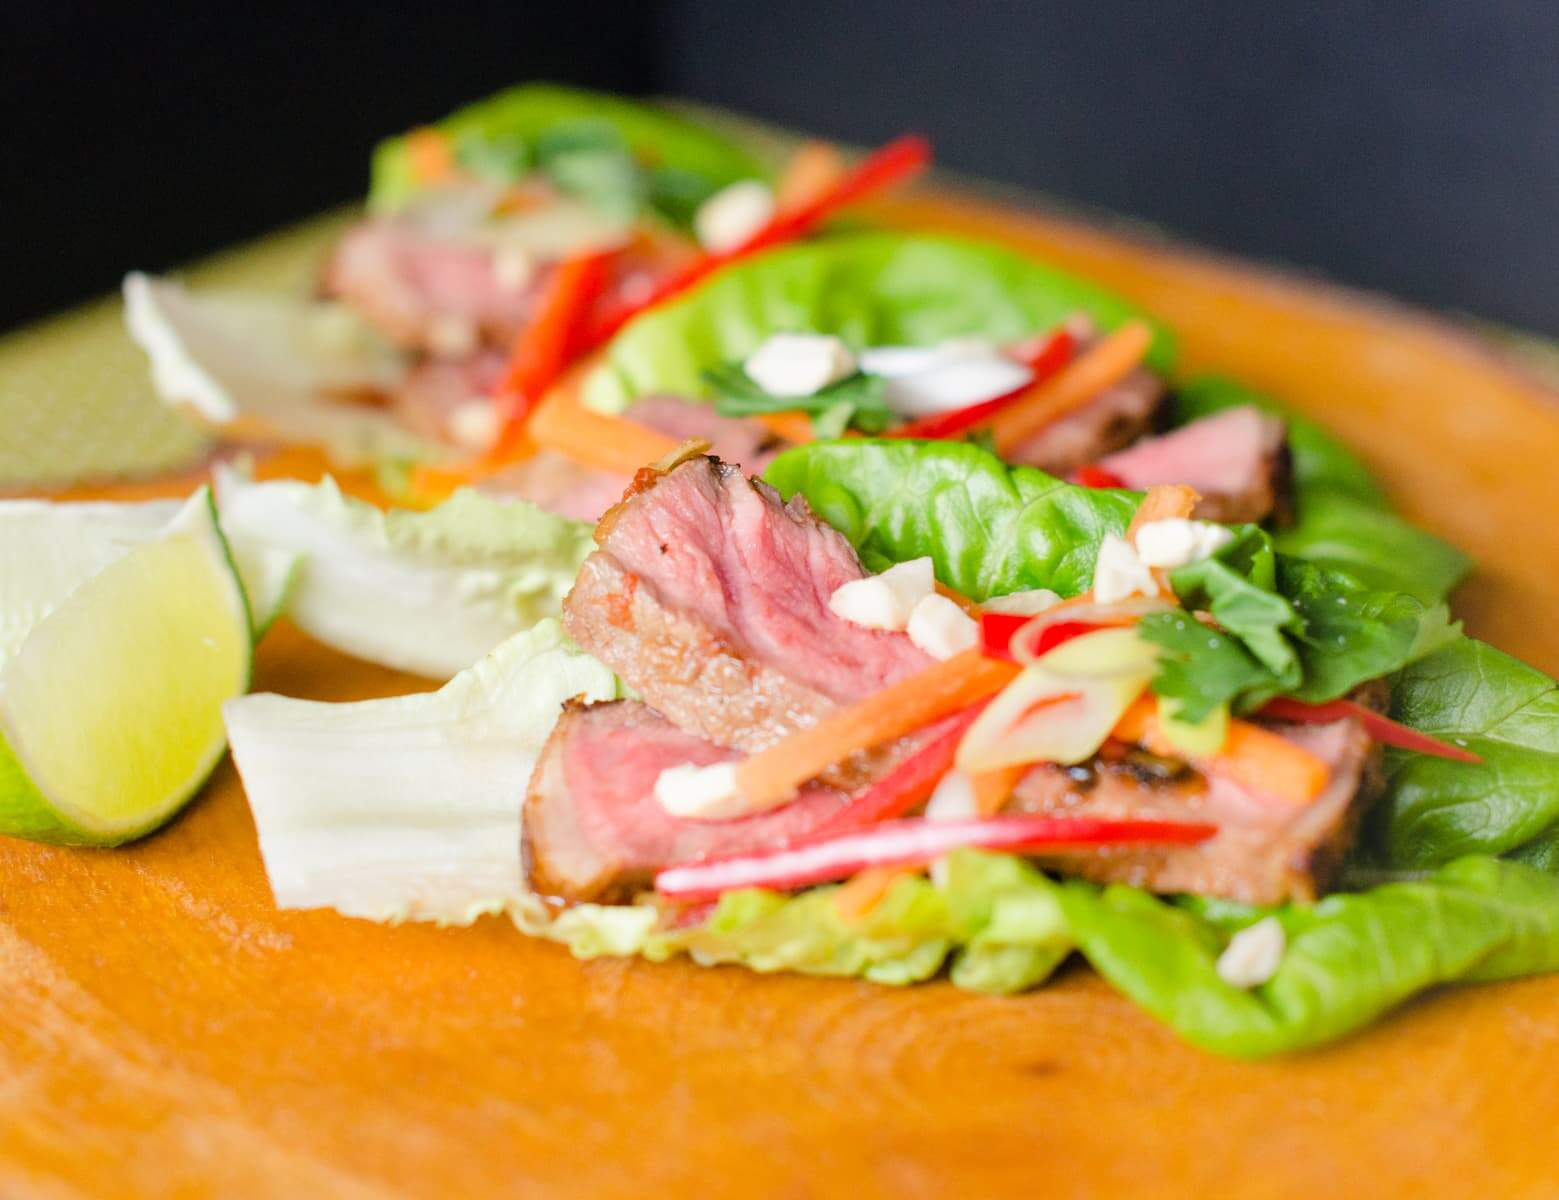 A wooden board with individual lettuce leaves piled with slices of rare cooked sirloin steak and salad vegetables.